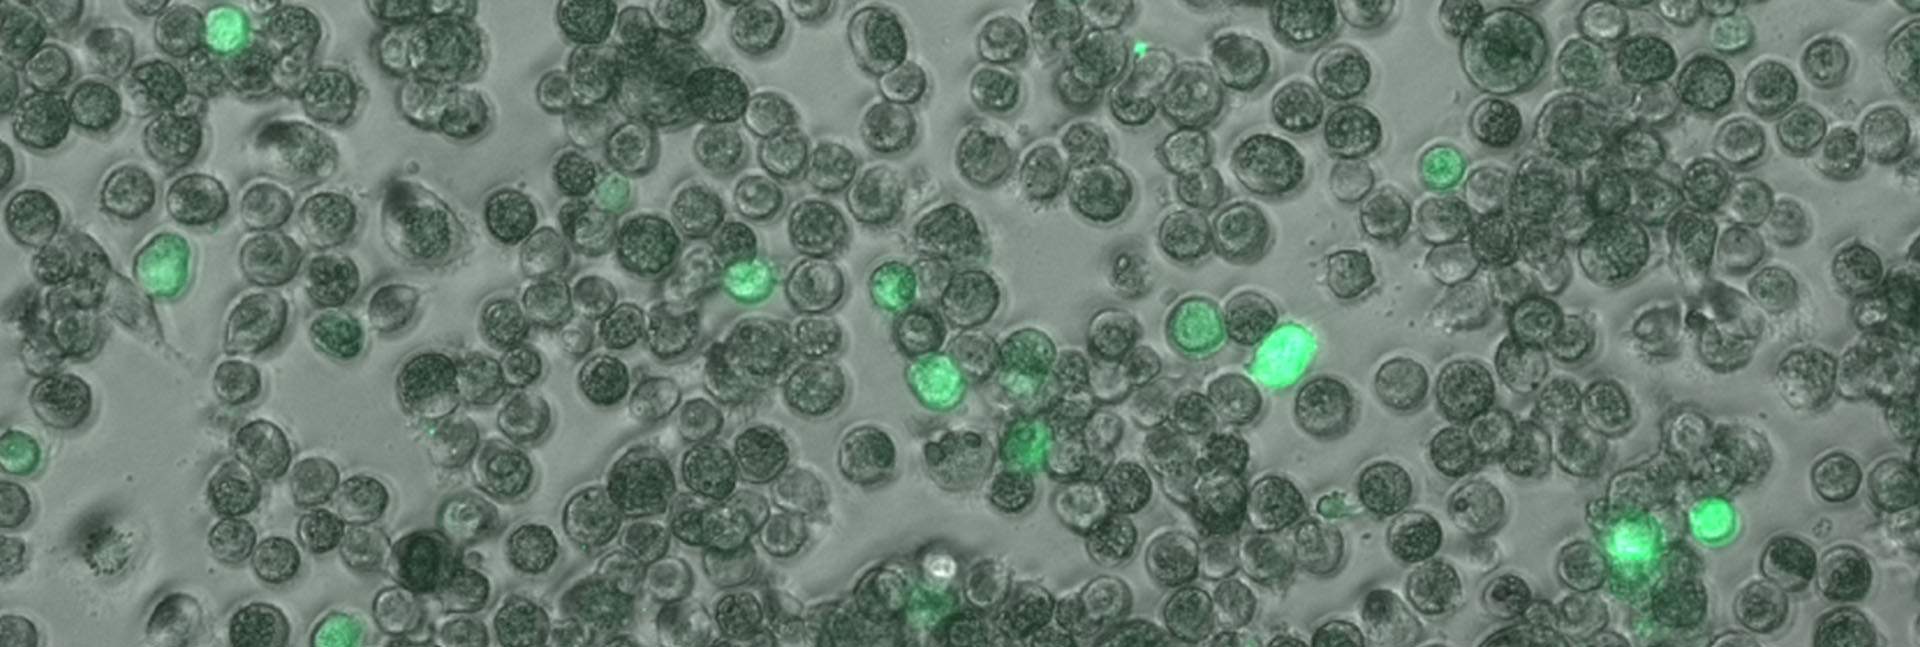 Lung macrophages infected with the human cytomegalovirus. Cells harboring an active infection are in bright green